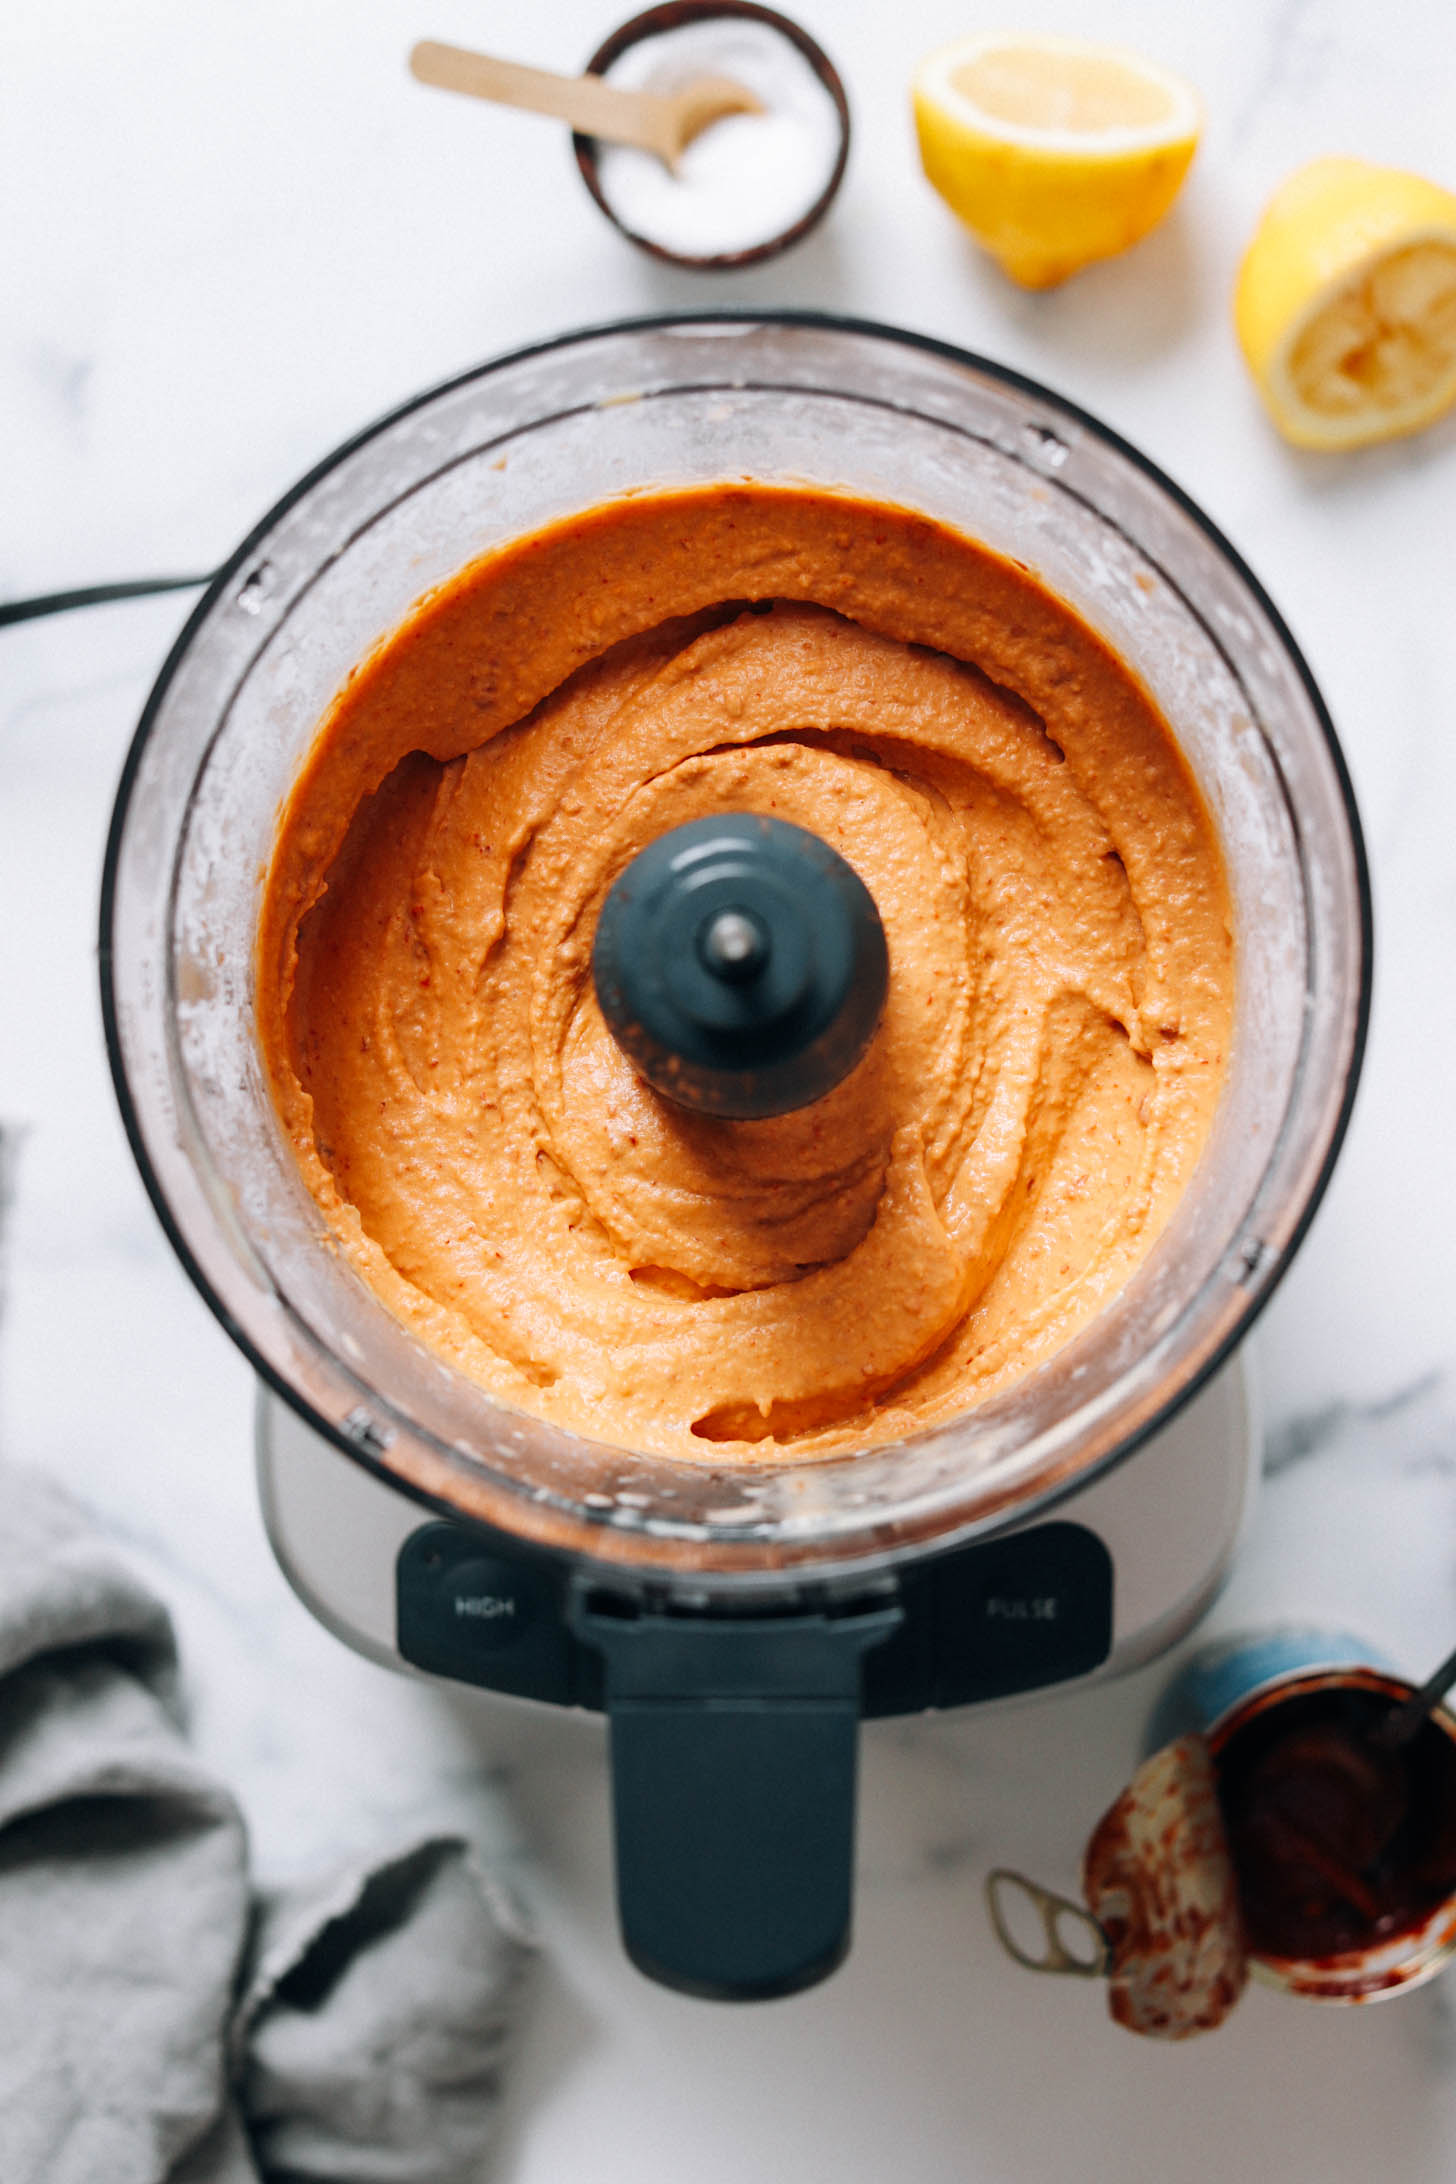 Vibrant red-orange hummus in a food processor next to lemons, salt, and adobo peppers